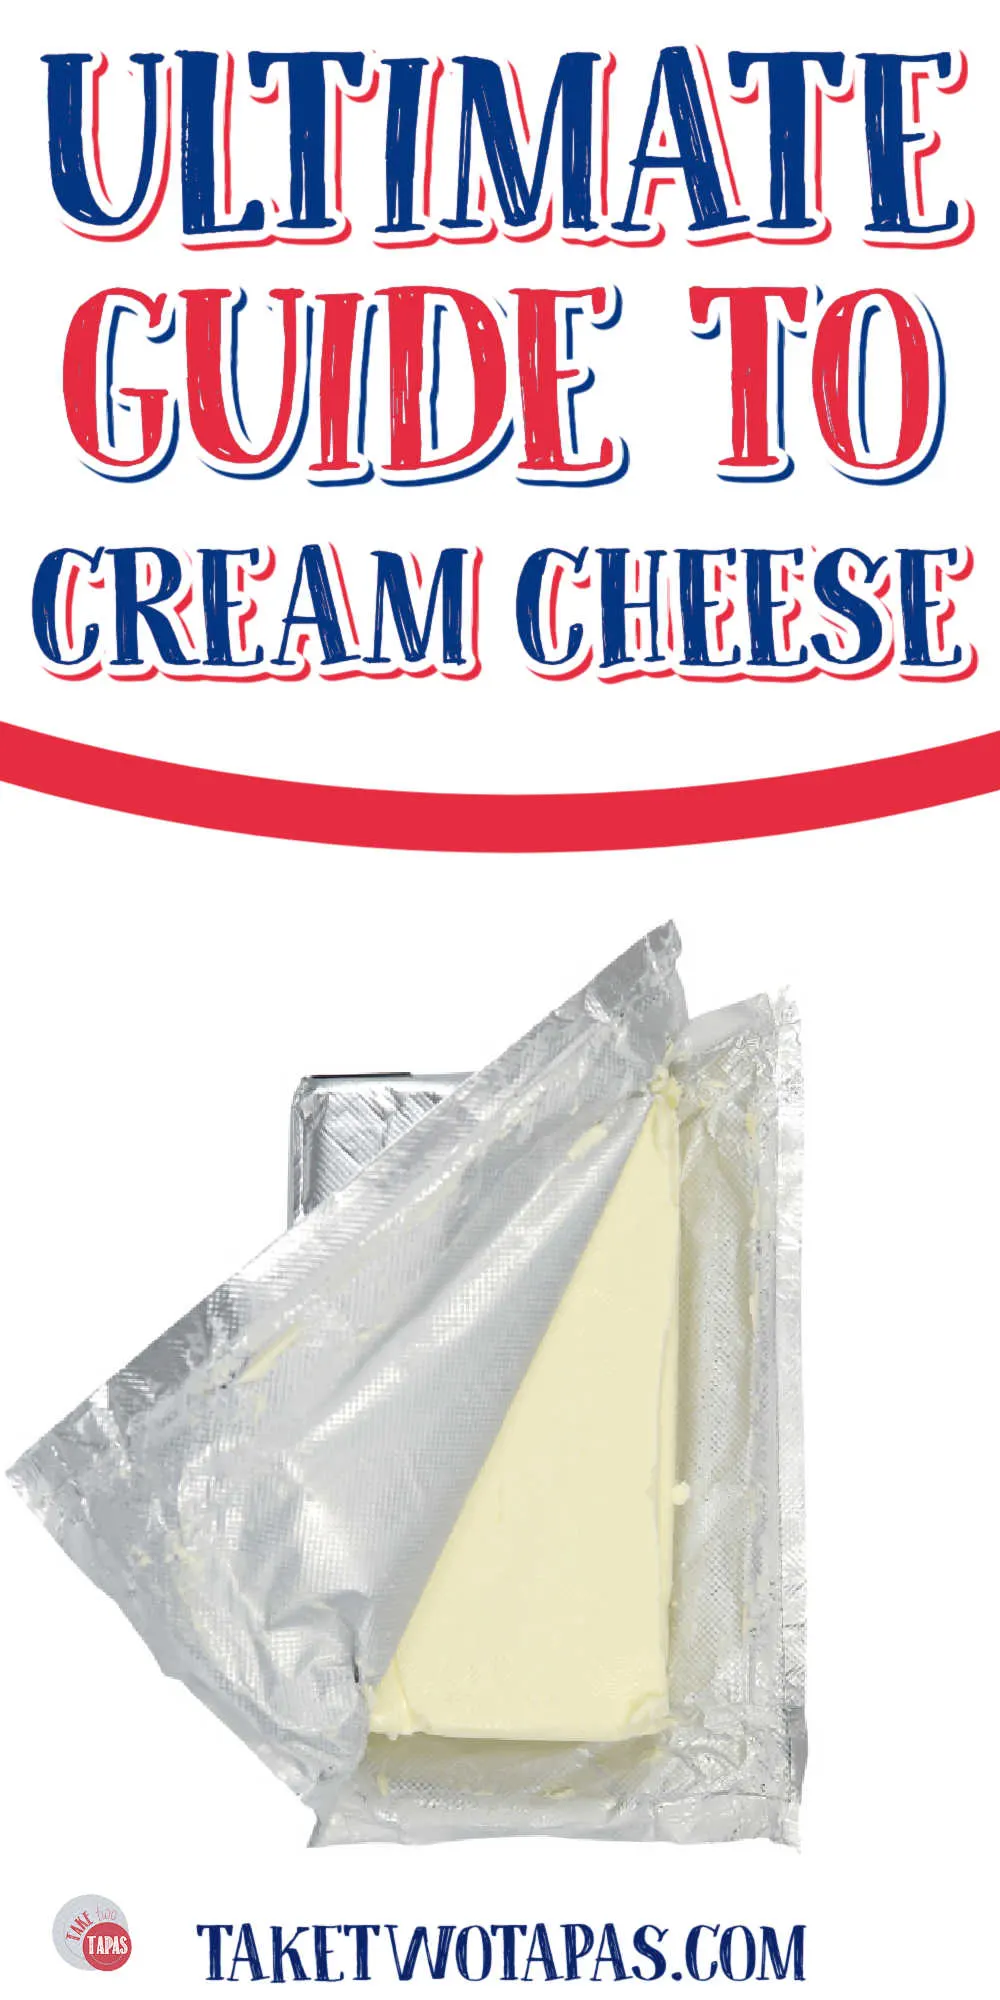 wrapper of cream cheese being partially opened with white banner and yellow text